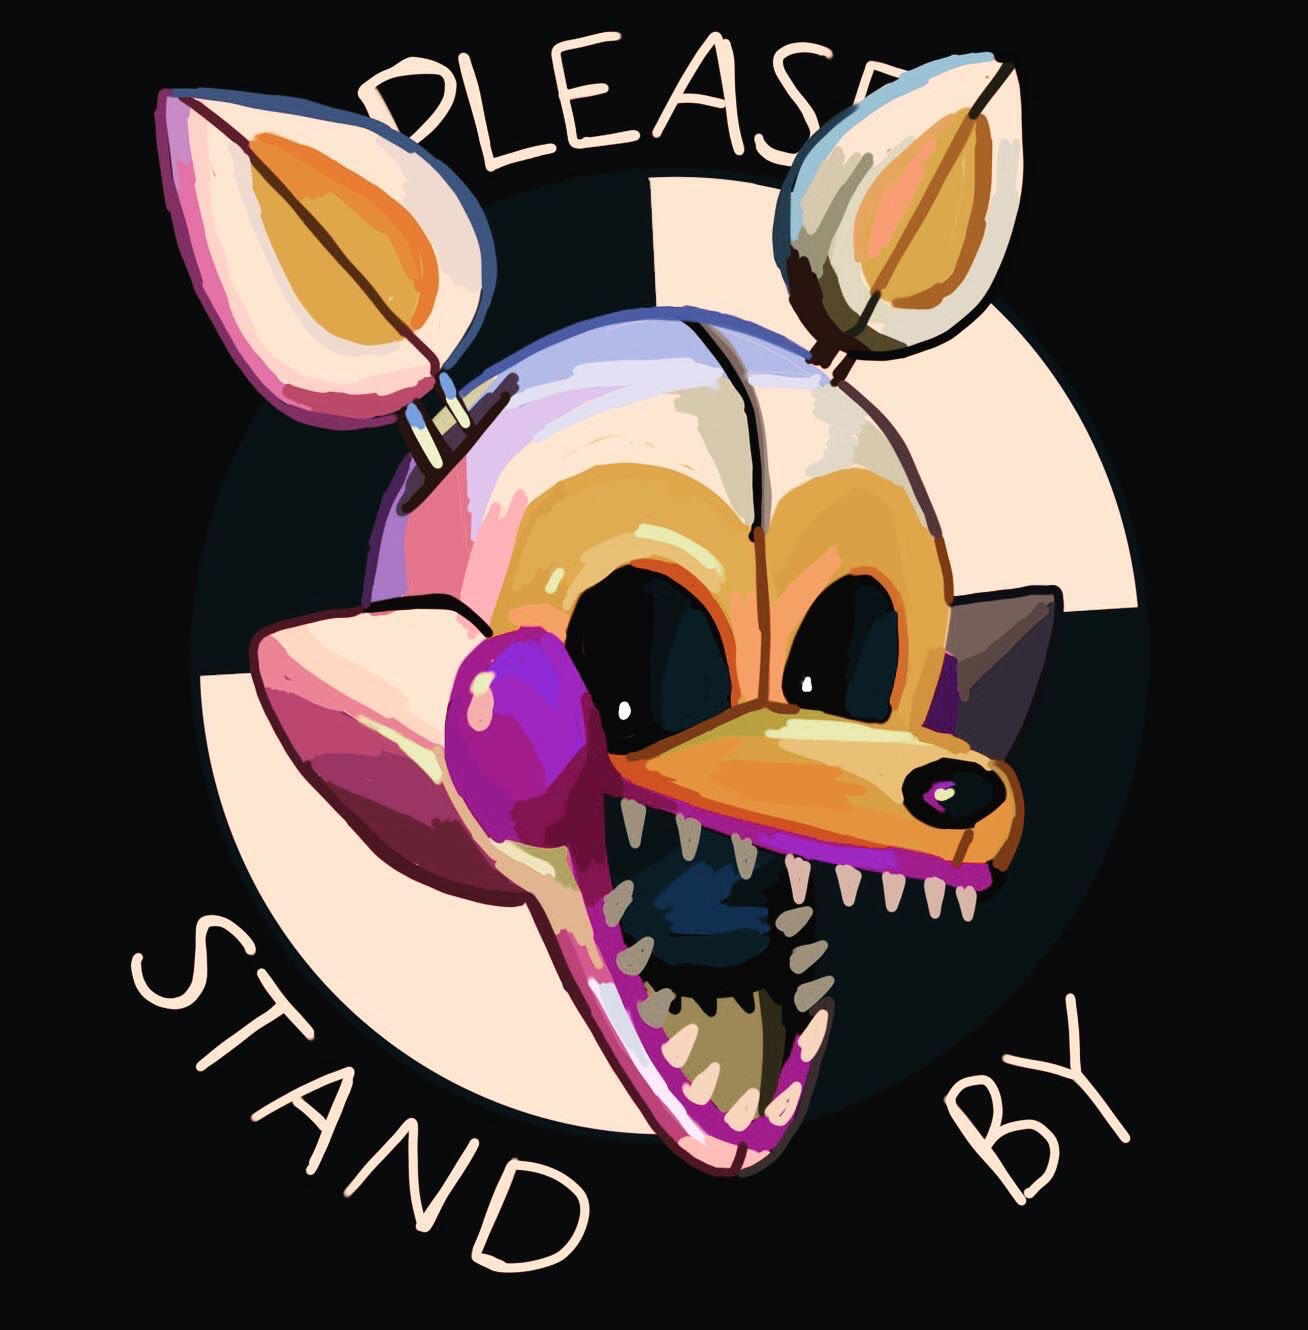 A digital painting of 'Lolbit' from 'Five Nights at Freddies' done in 2022.